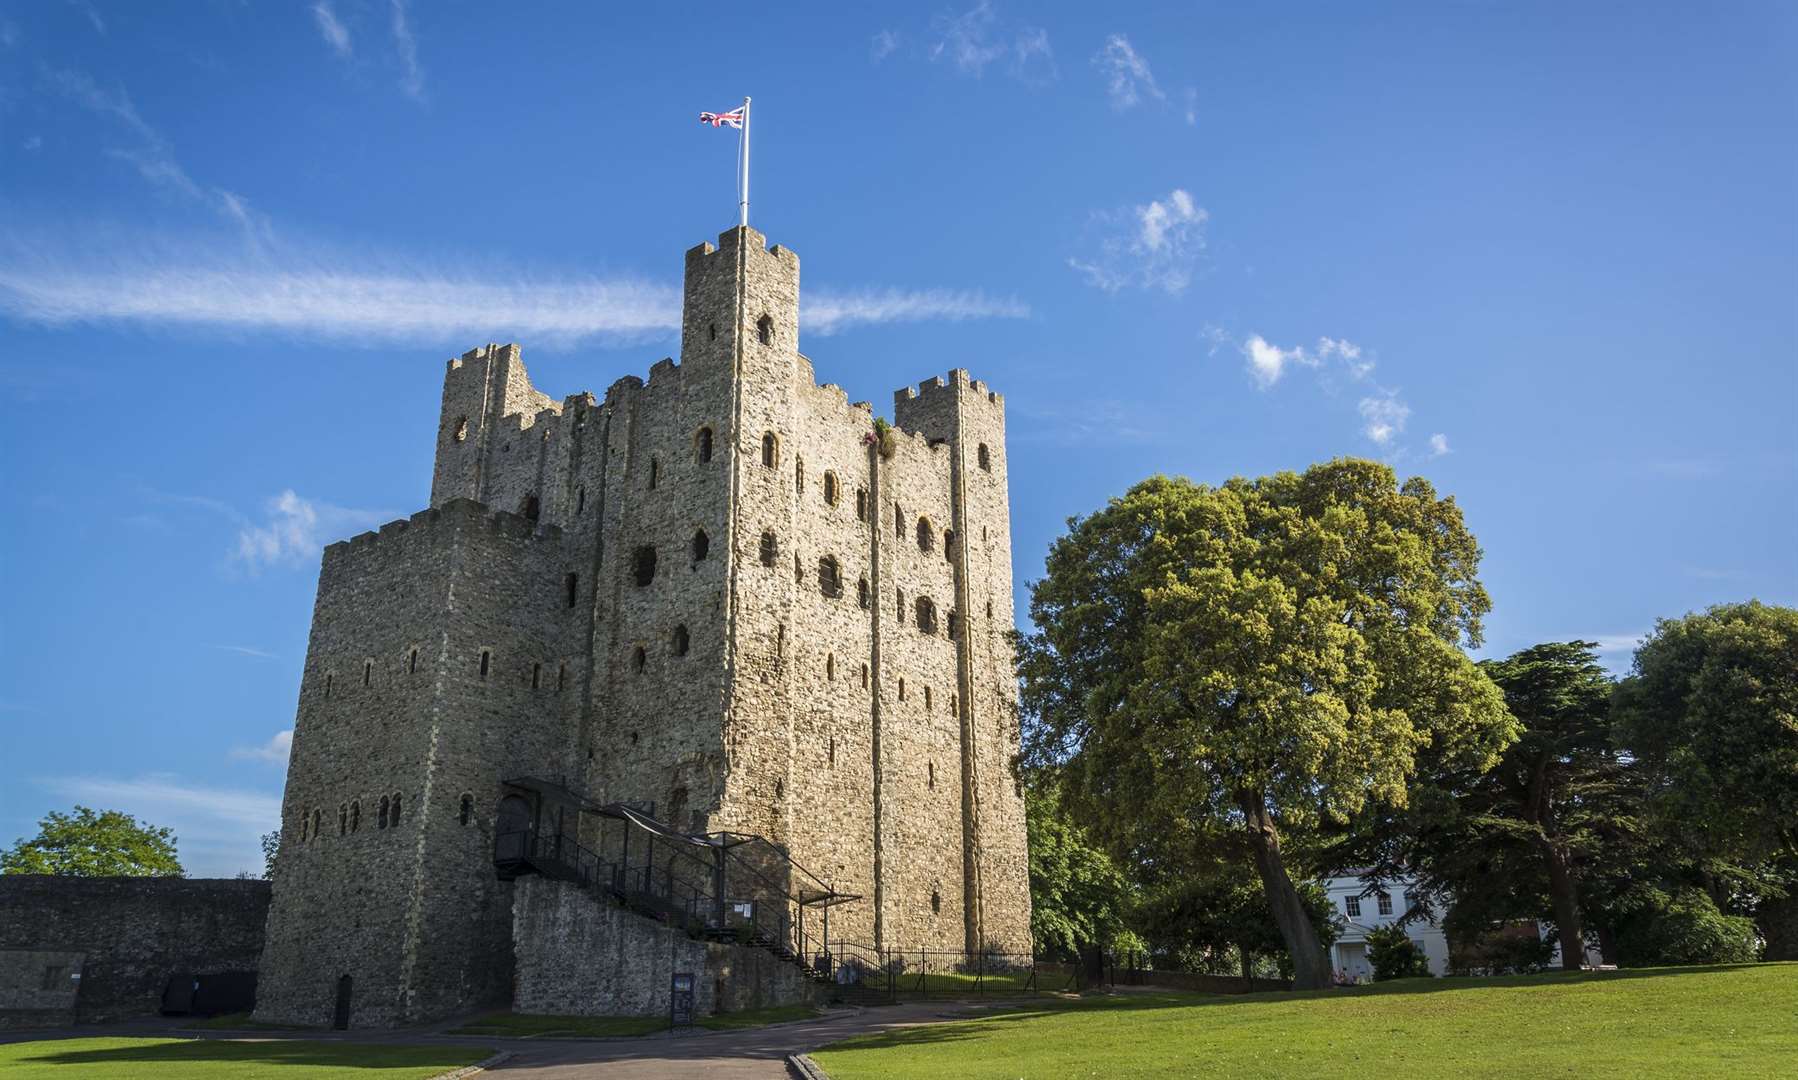 Rochester Castle - the 12th-century keep or stone tower is one of the best preserved in England